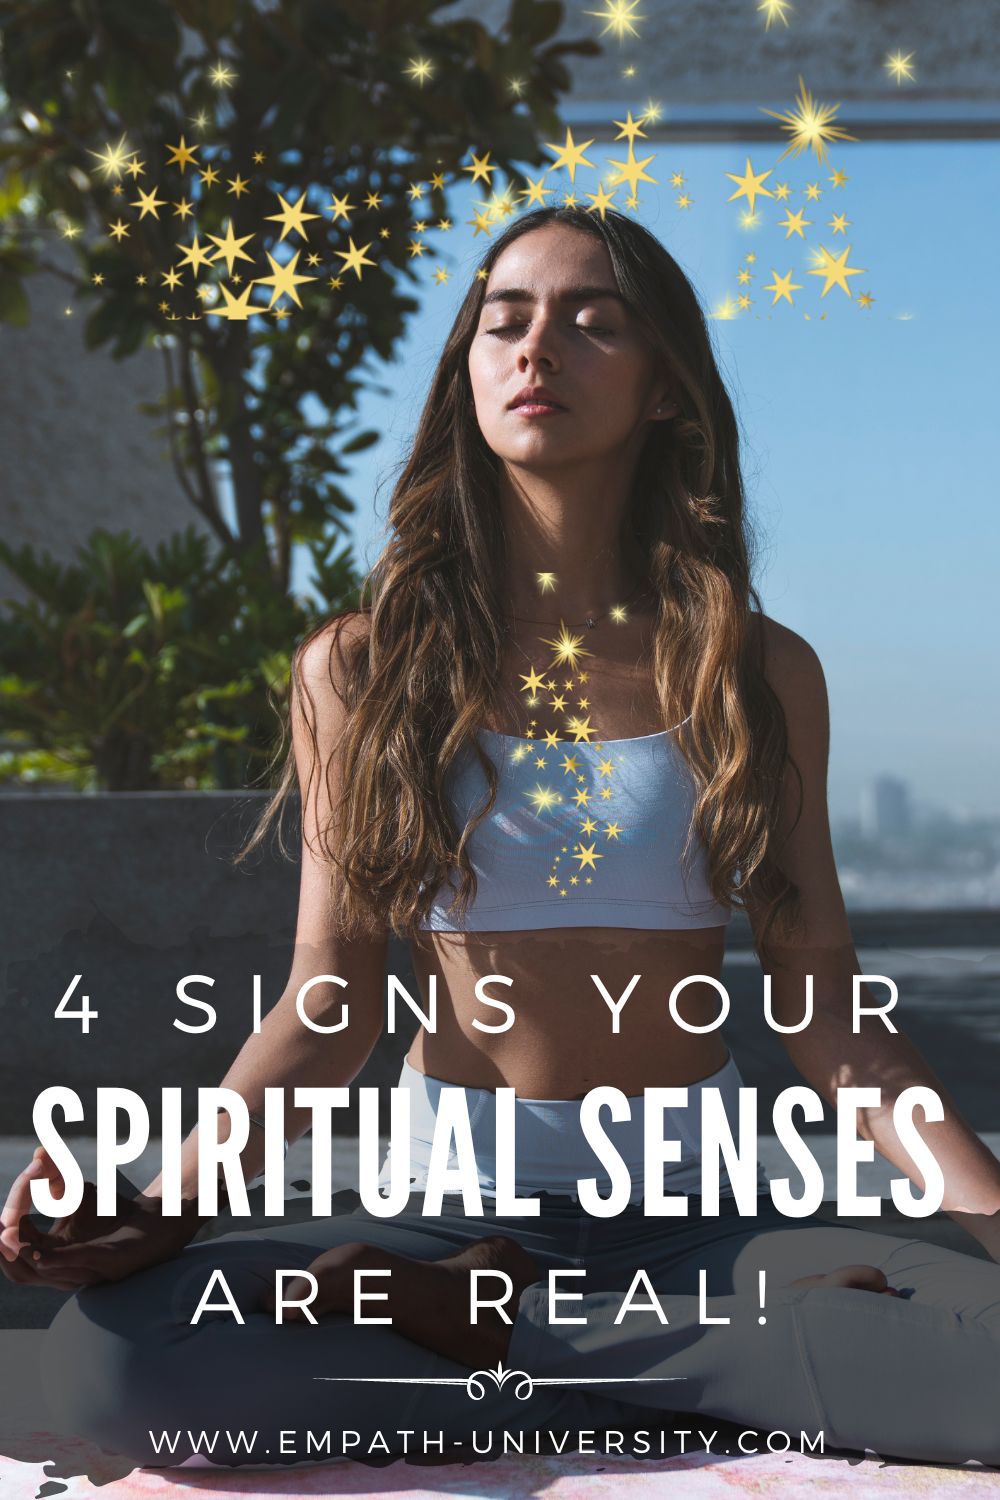 4 Signs Your Spiritual Senses Are Real